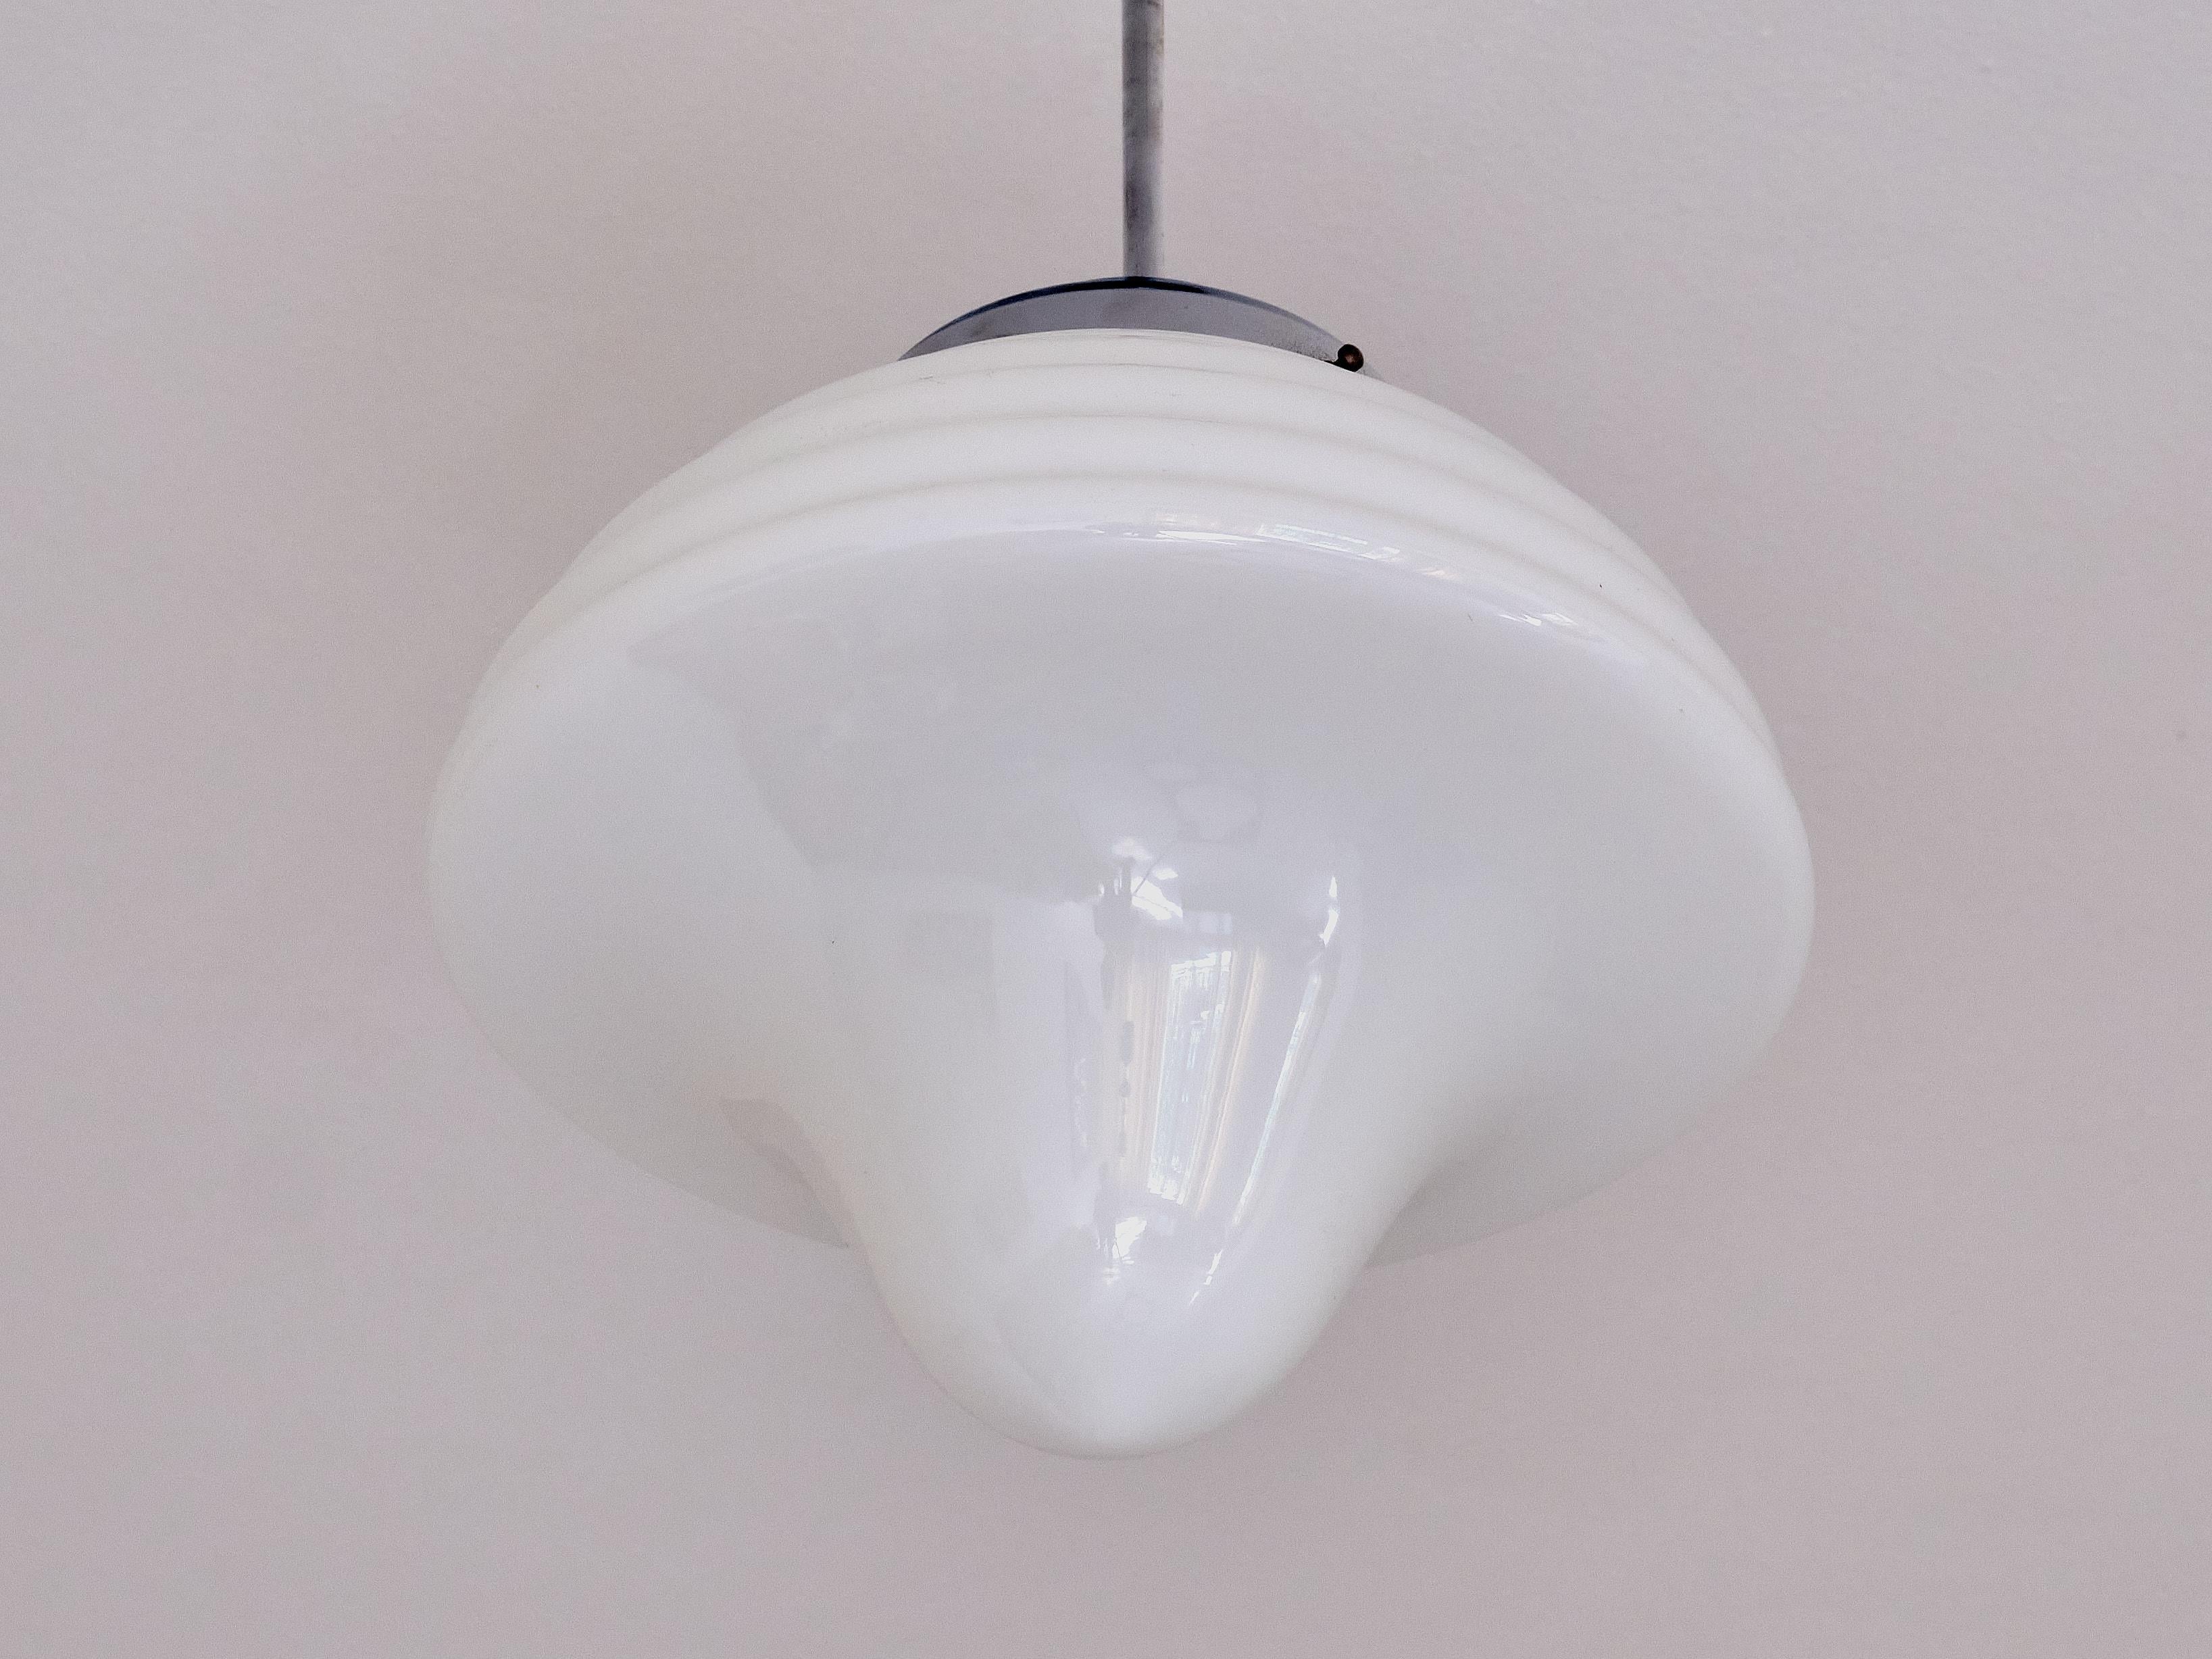 Art Deco Drop Shaped Pendant Light in Opal Glass and Nickel, Netherlands, 1930s For Sale 3